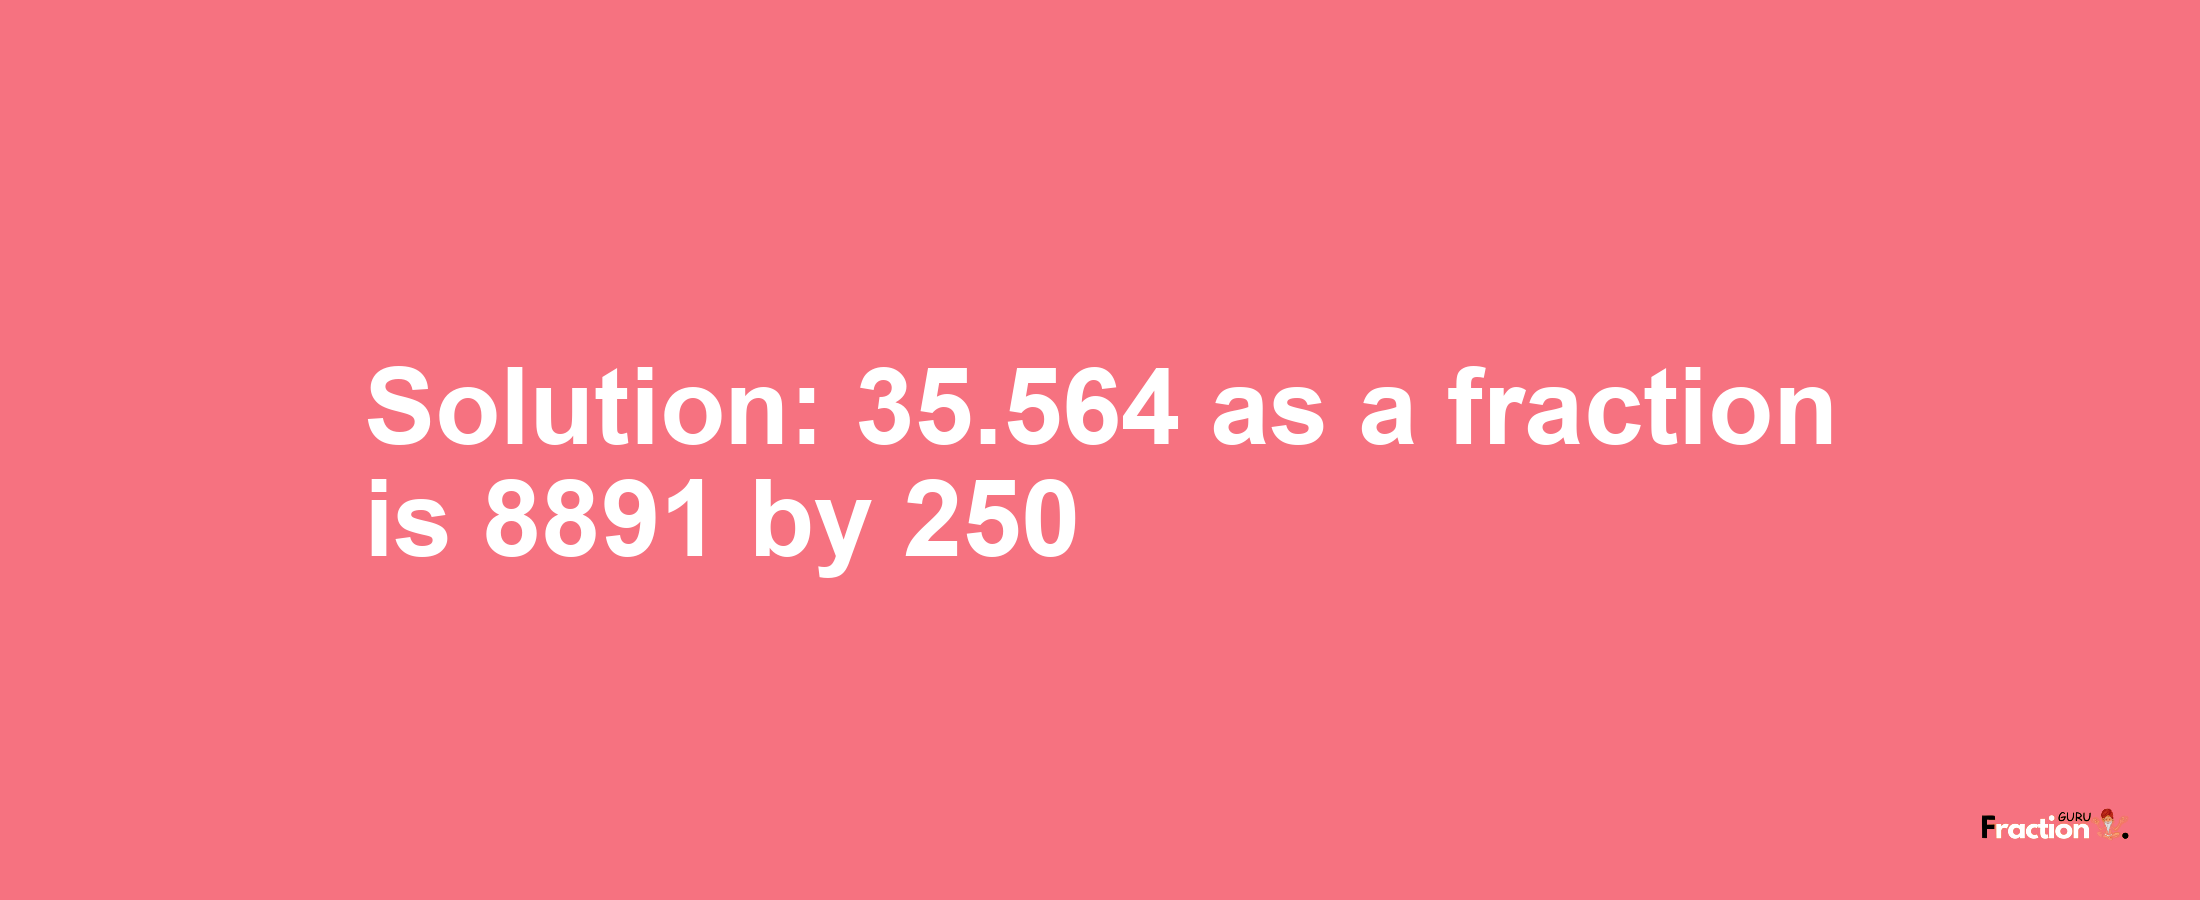 Solution:35.564 as a fraction is 8891/250